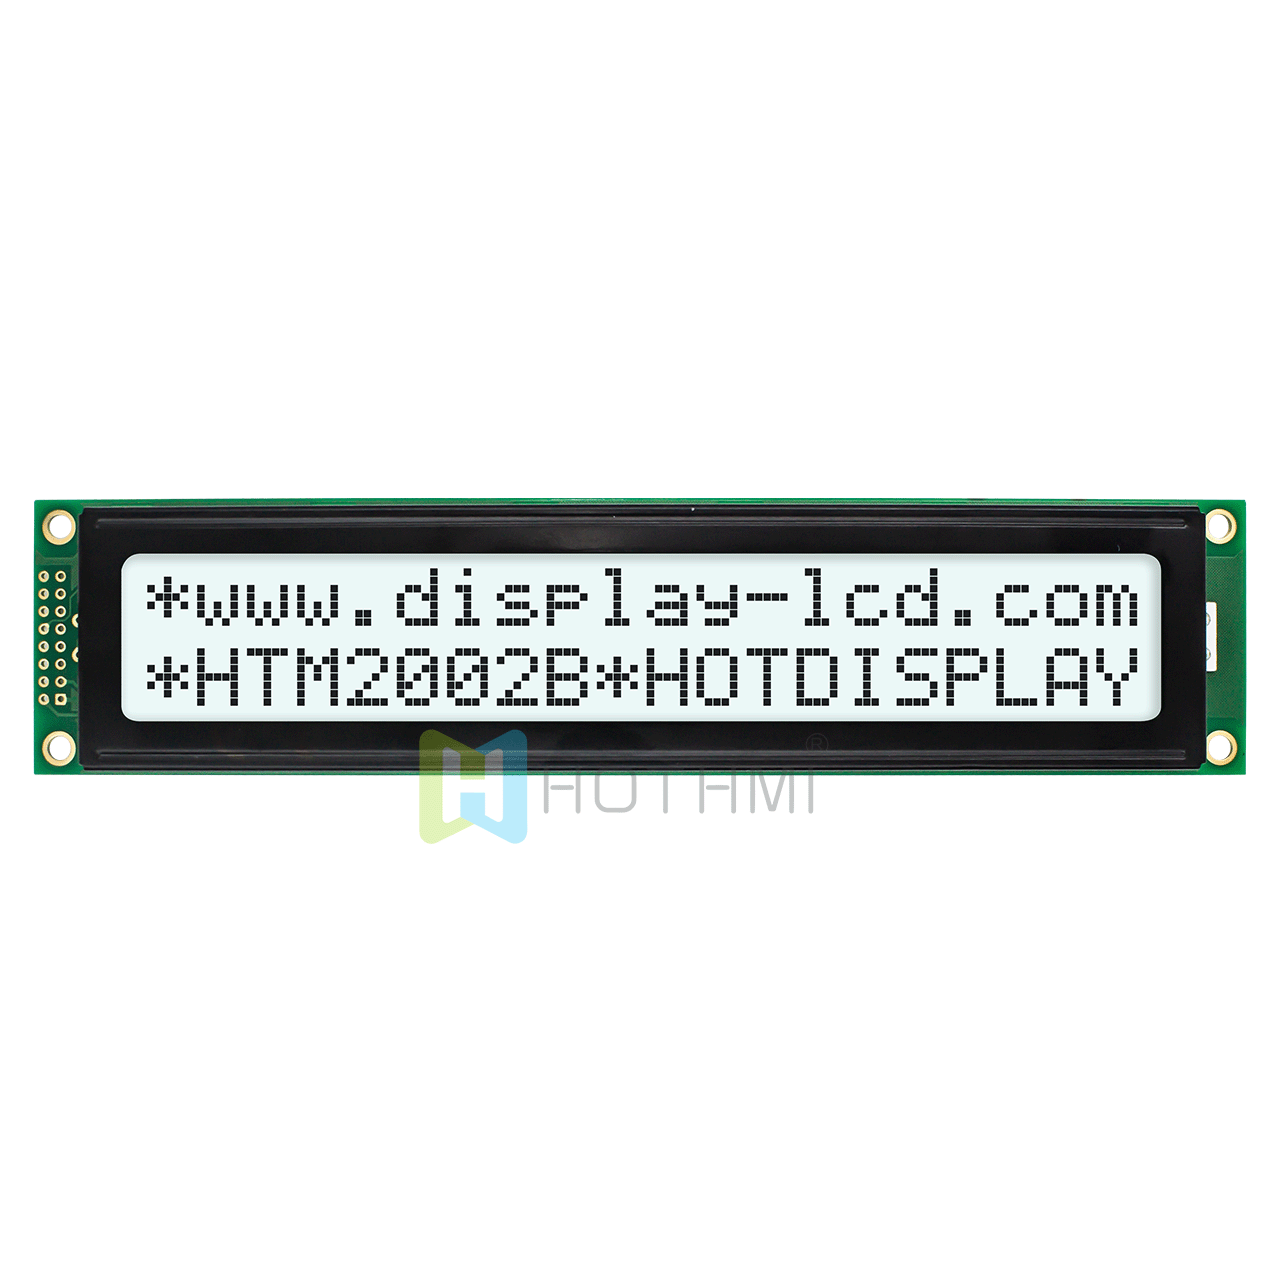 Arduino-20X2 character monochrome LCD module/FSTN/white backlight/grey characters on white background/5.0V/ST7066U control